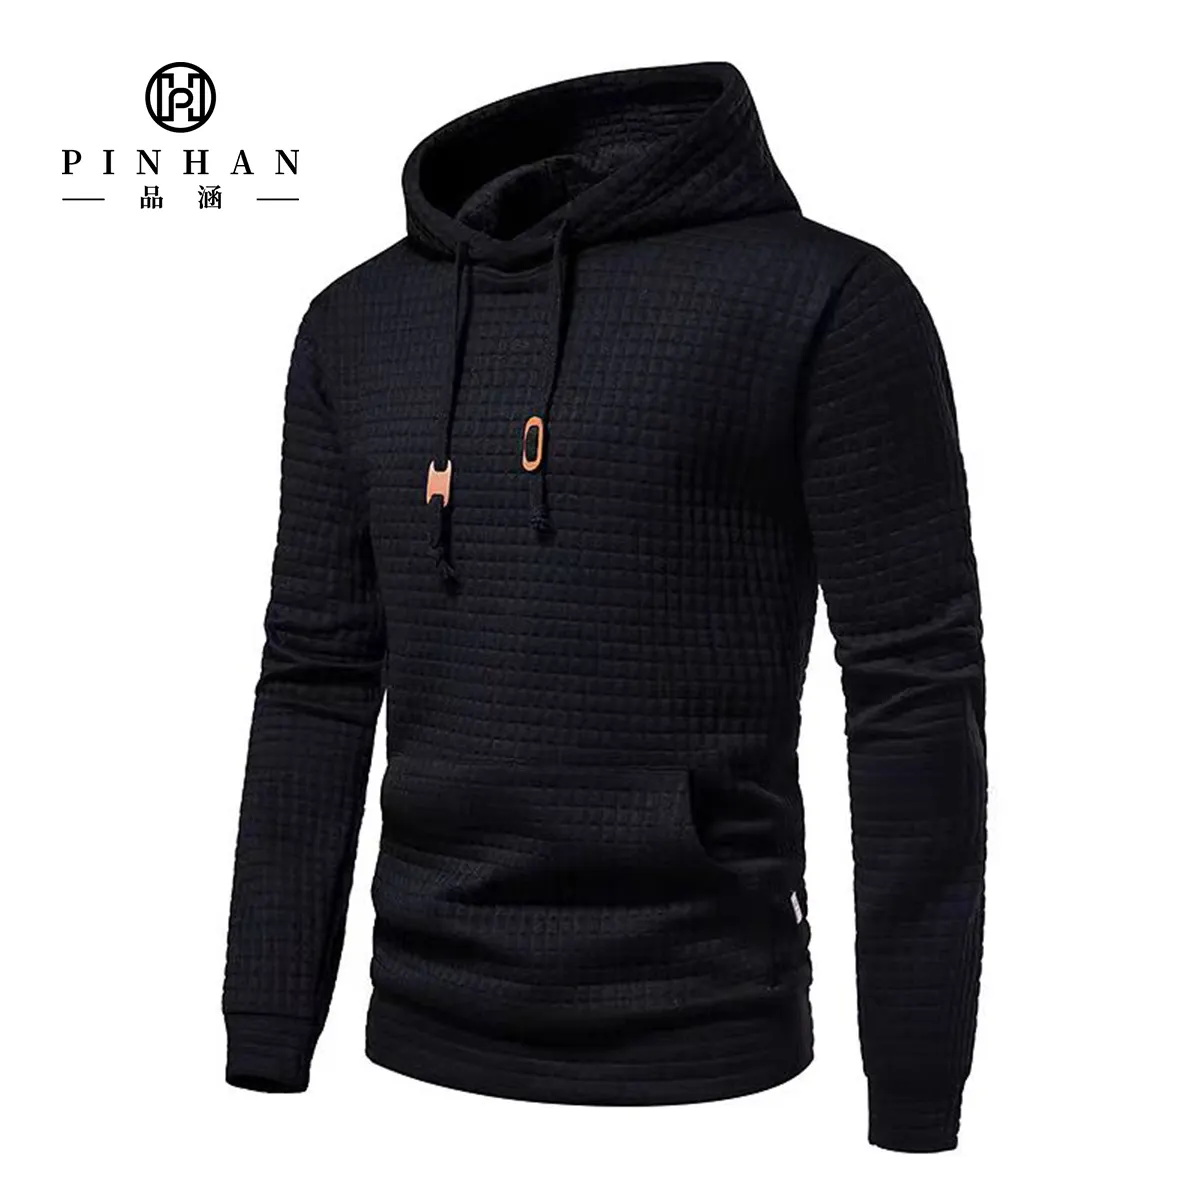 Warm Comfortable Men's Long Sleeve Sweatshirt Breathable Cotton Fabric Casual Fitted Sports Hoodies with Kangroo Pocket